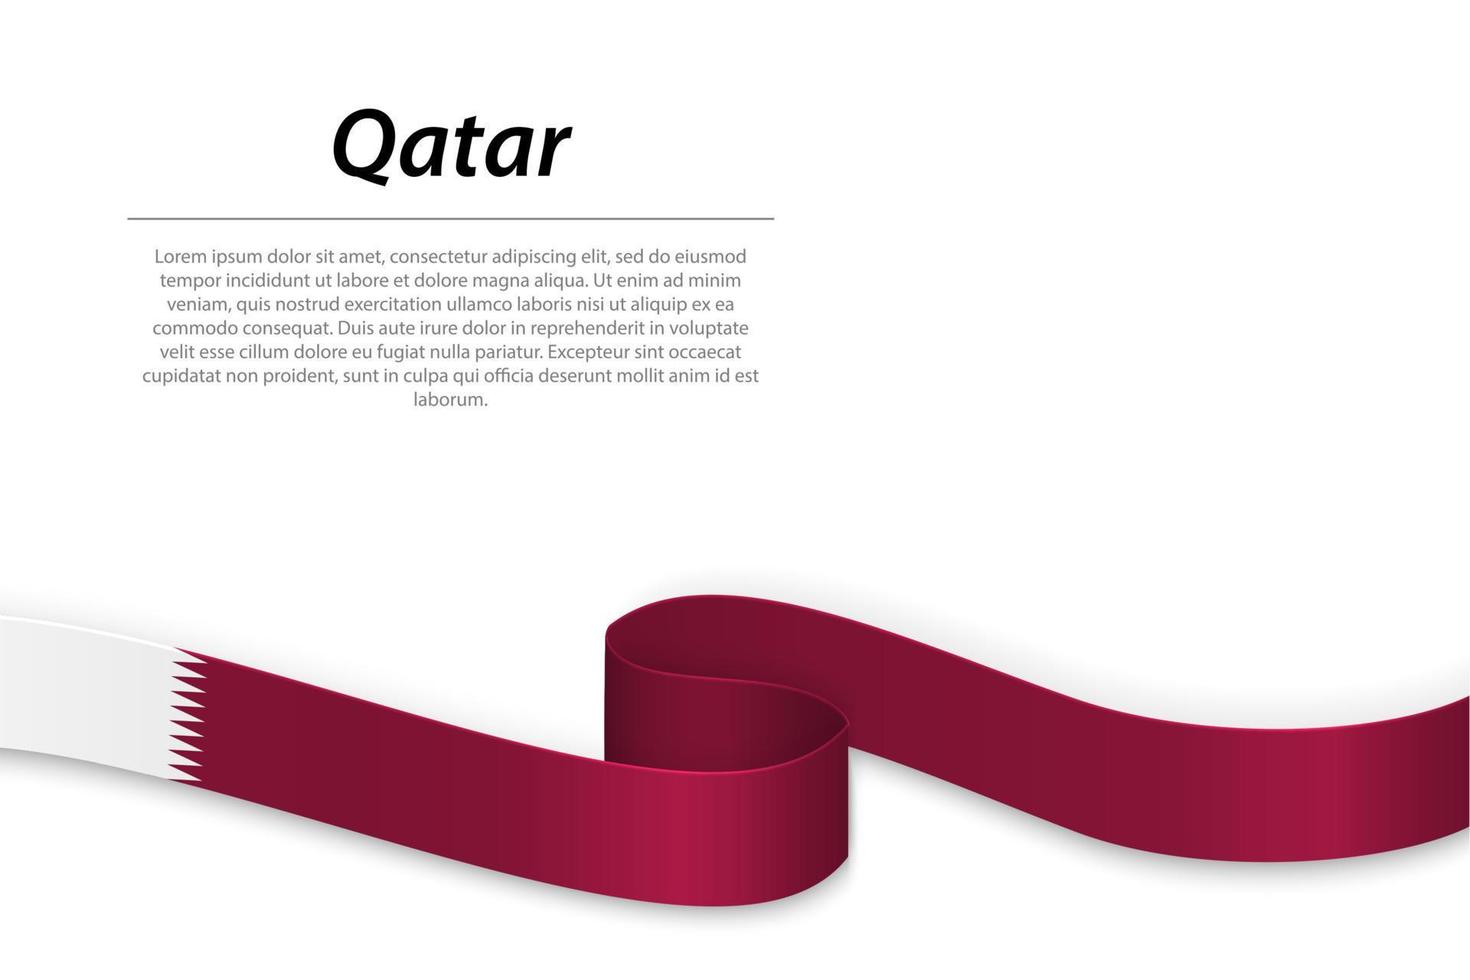 Waving ribbon or banner with flag of Qatar vector